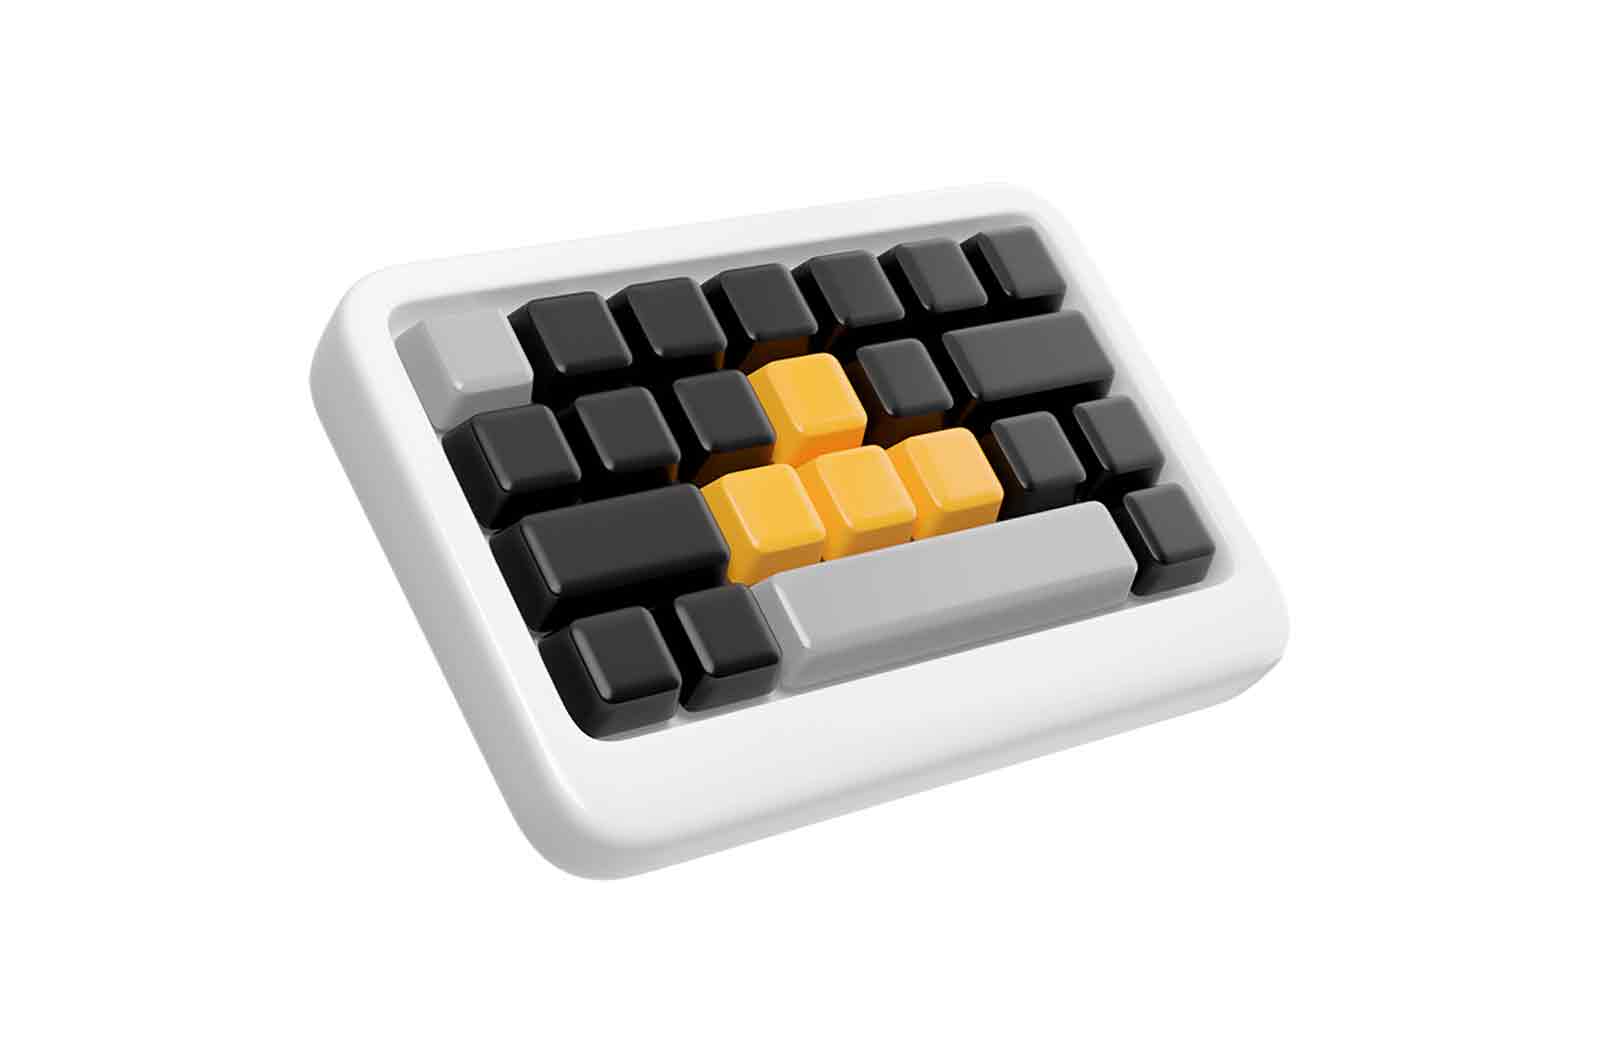 Mini keyboard, 3d rendered illustration, with black and yellow keys and white body. Isolated on white background, realistic look.